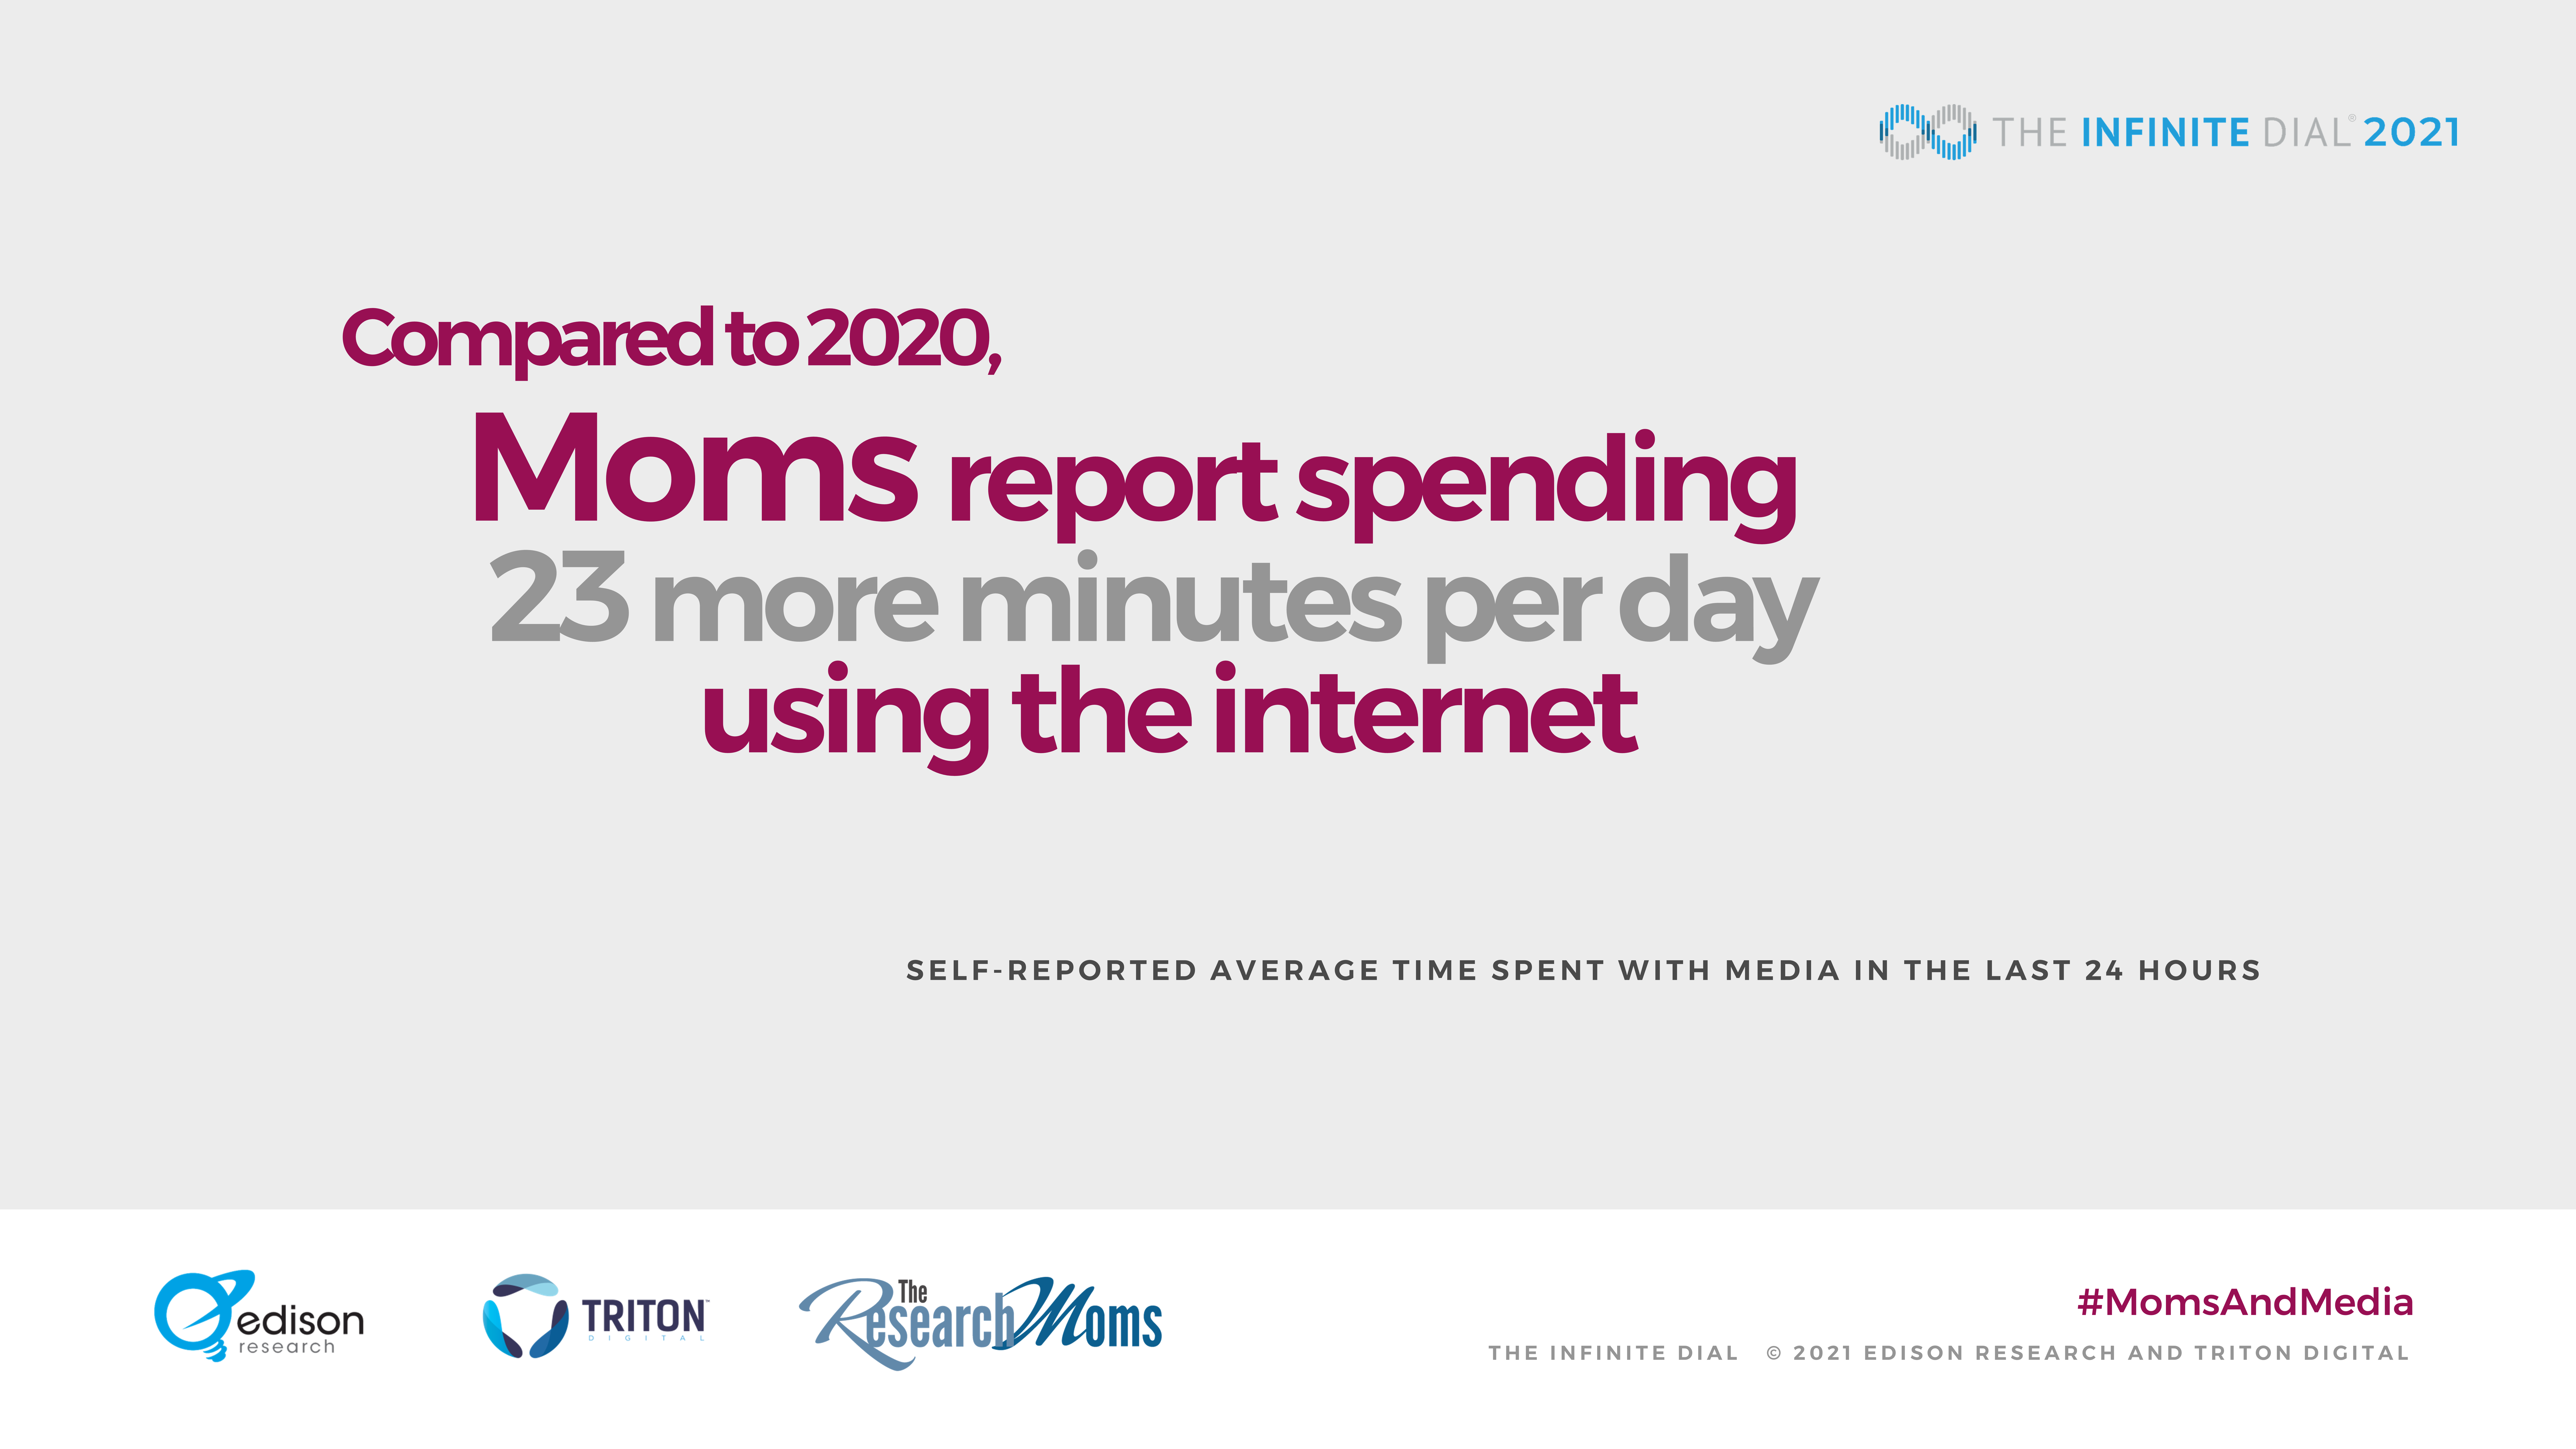 Moms spend more time on the internet than in 2020